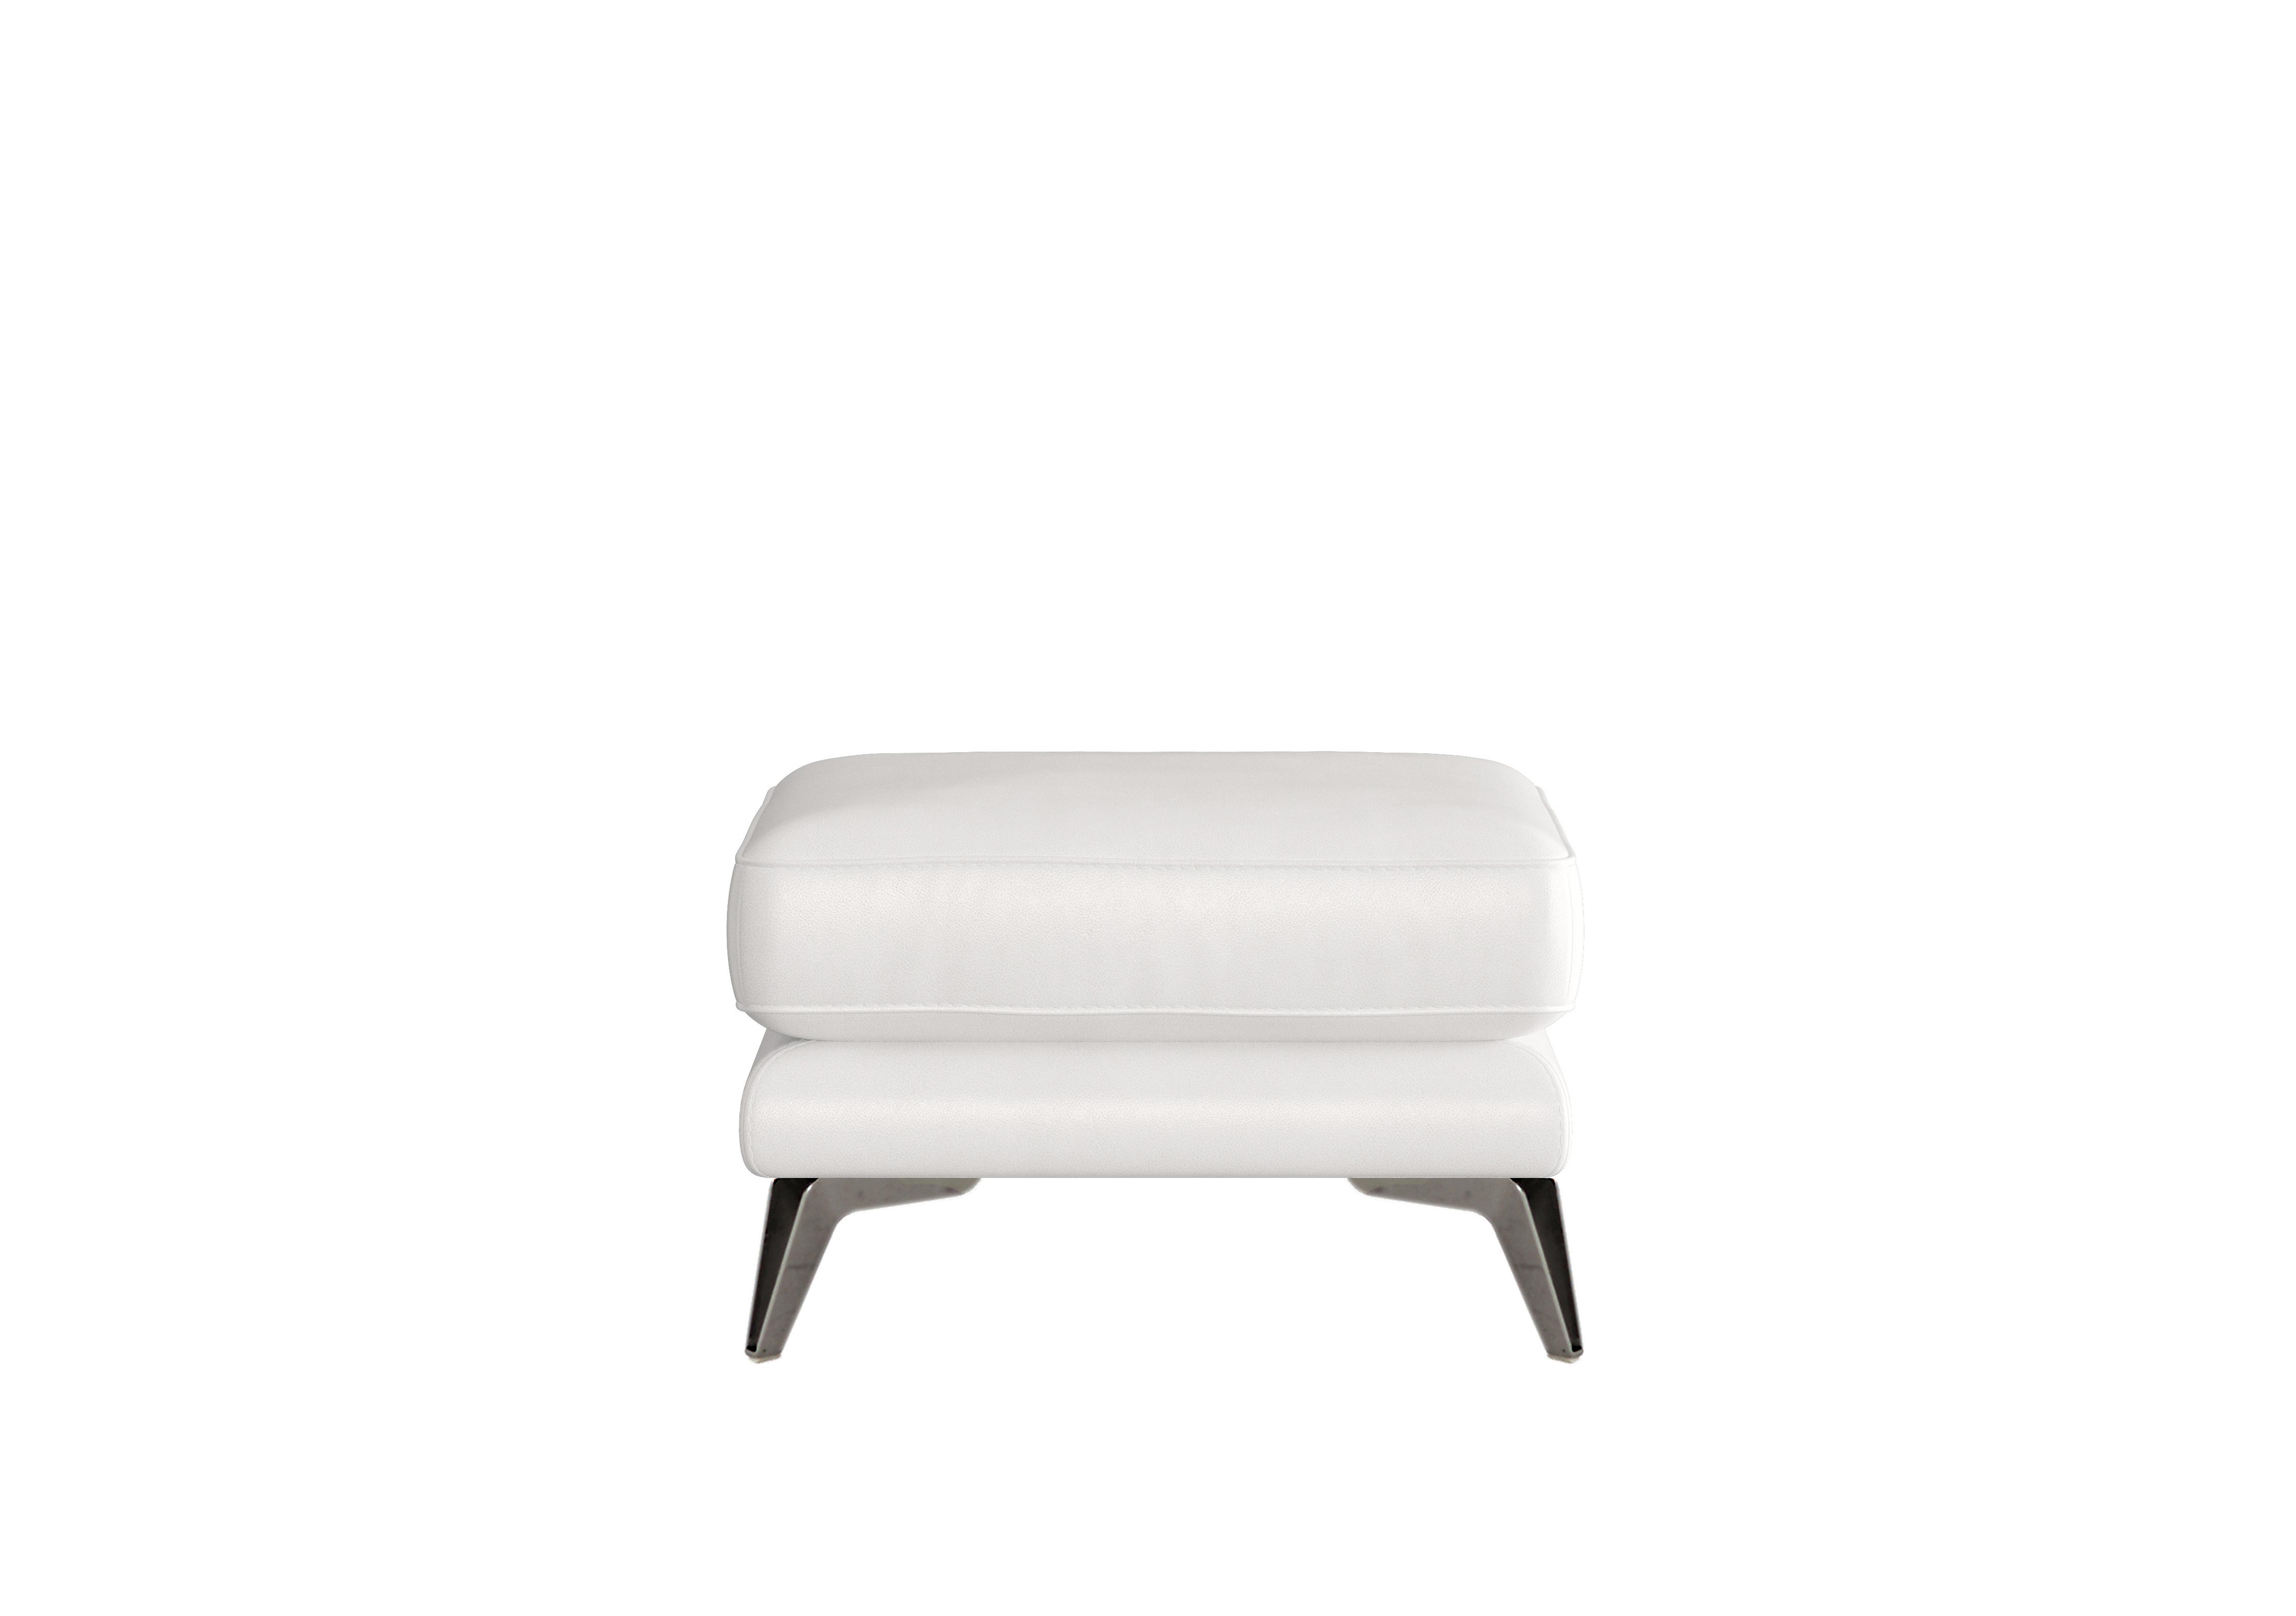 Contempo Leather Footstool in Bv-744d Star White on Furniture Village